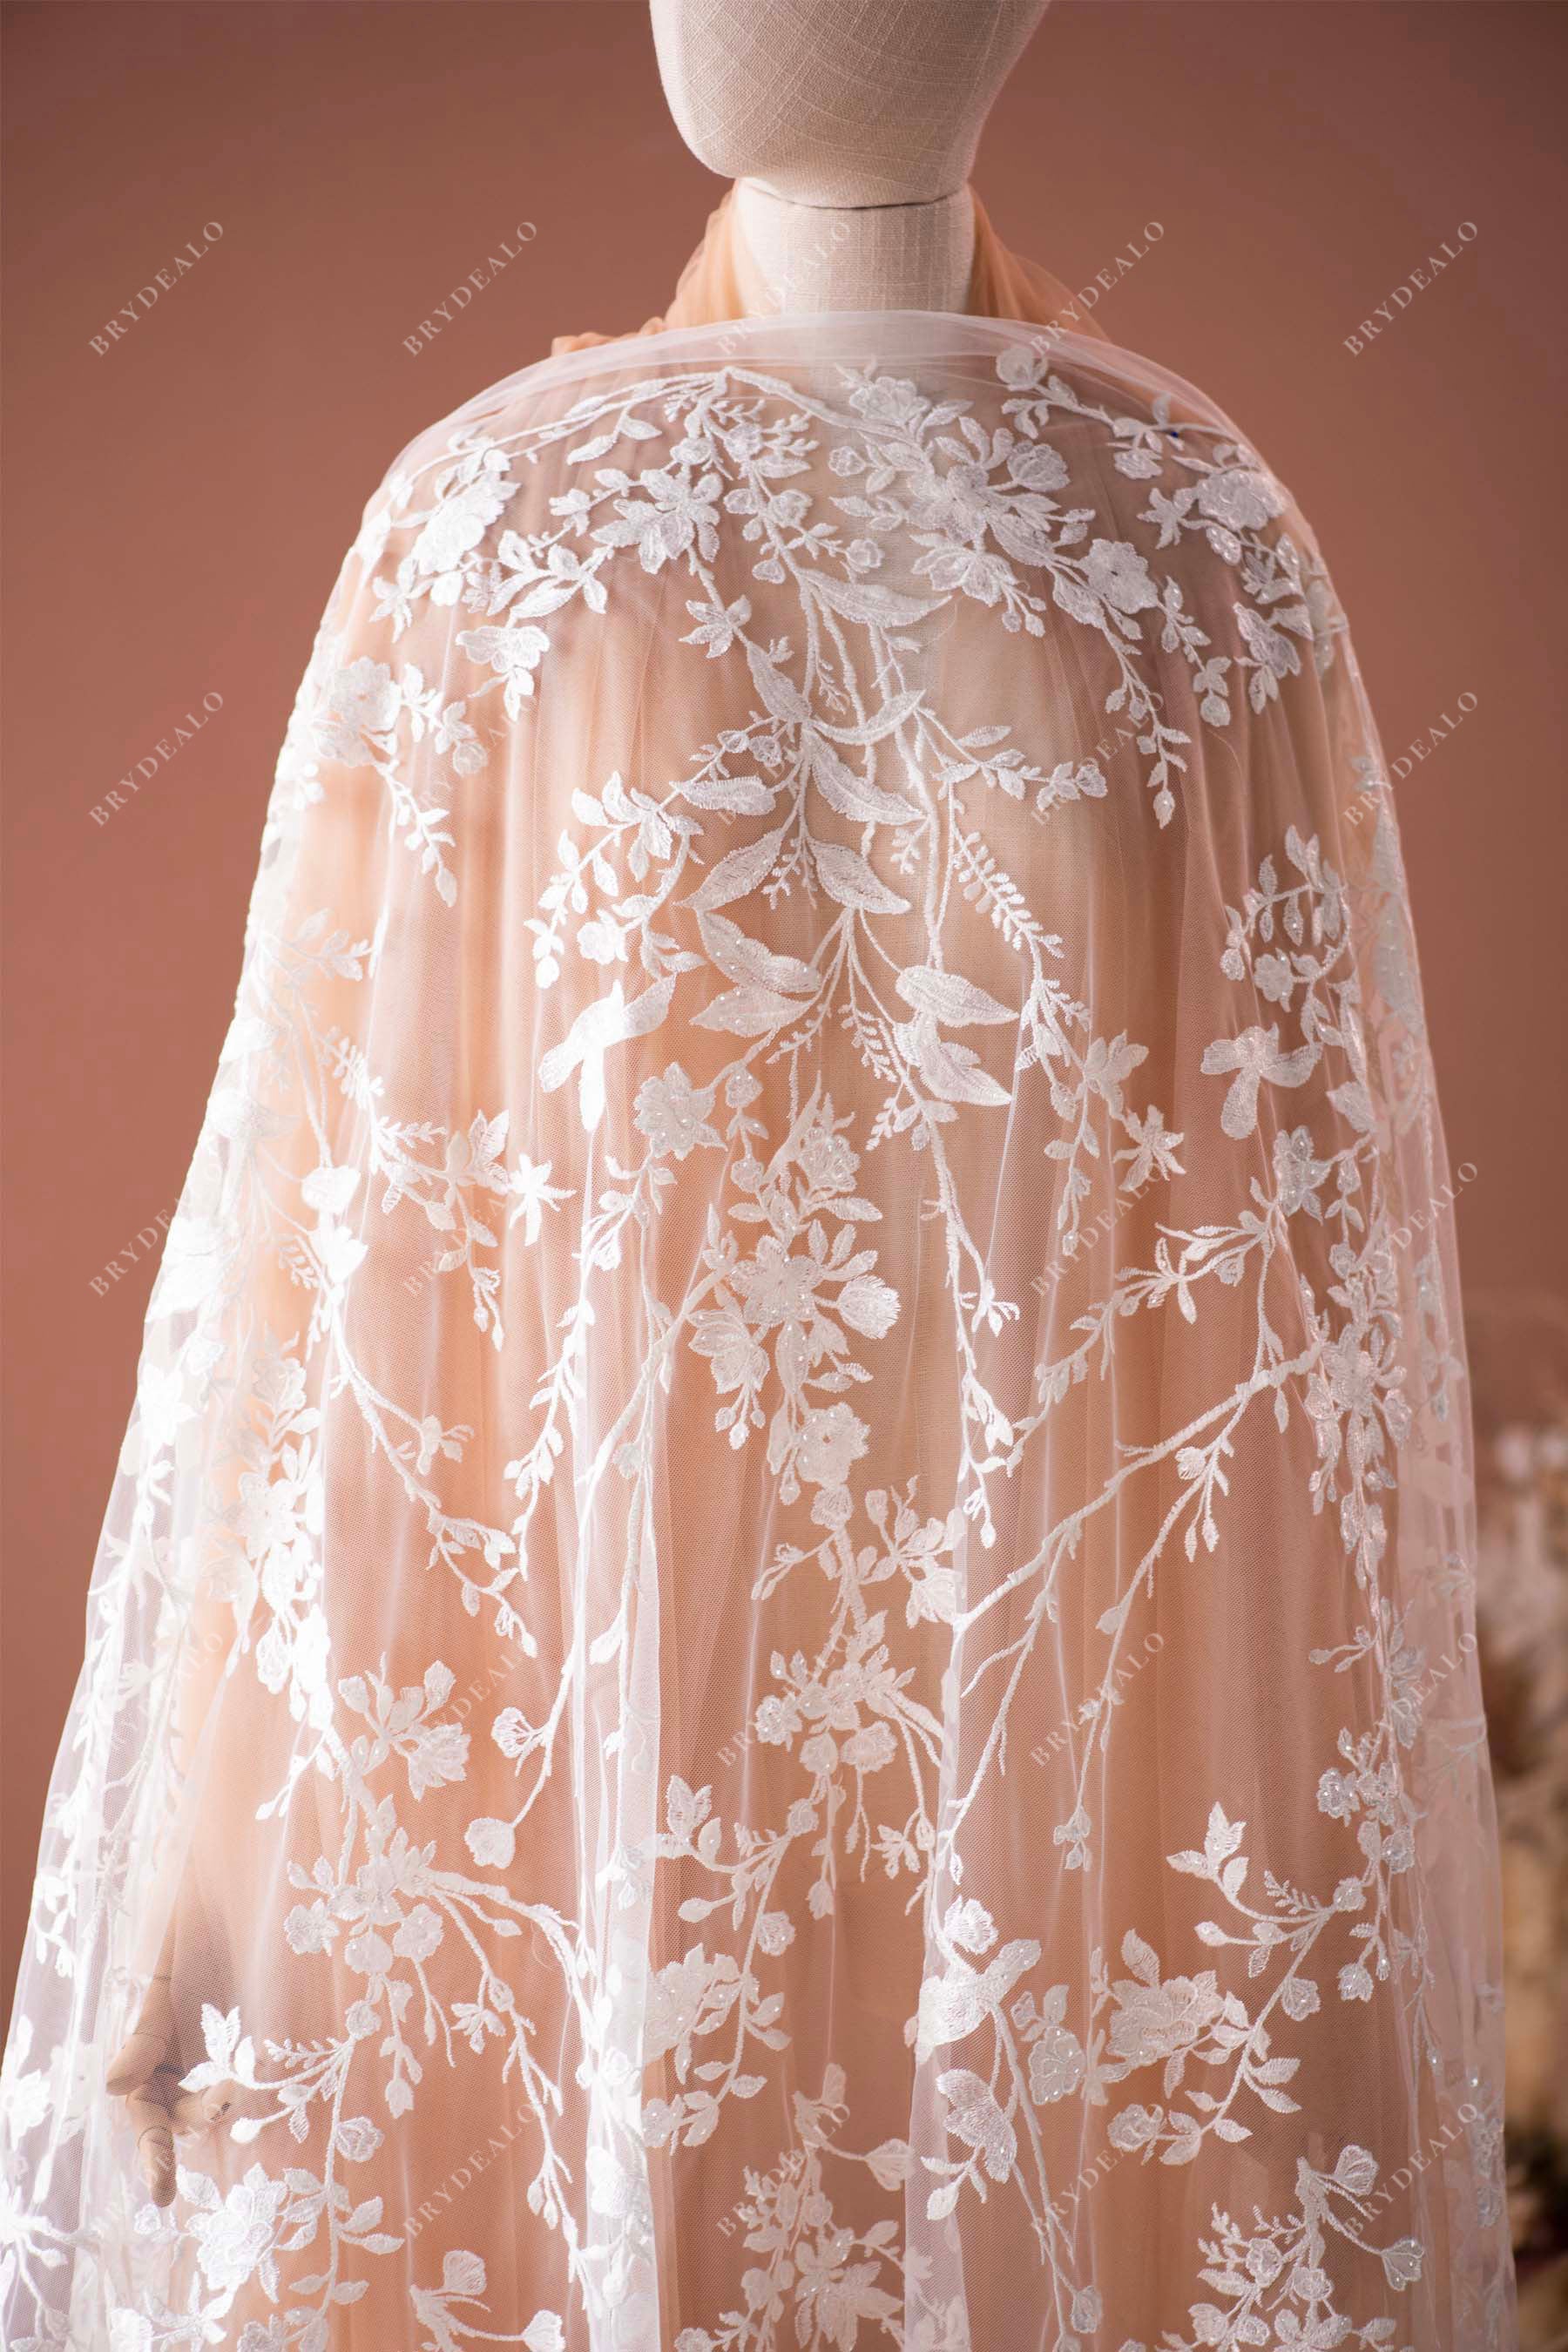 embroidery bridal lace fabric sold by the yard